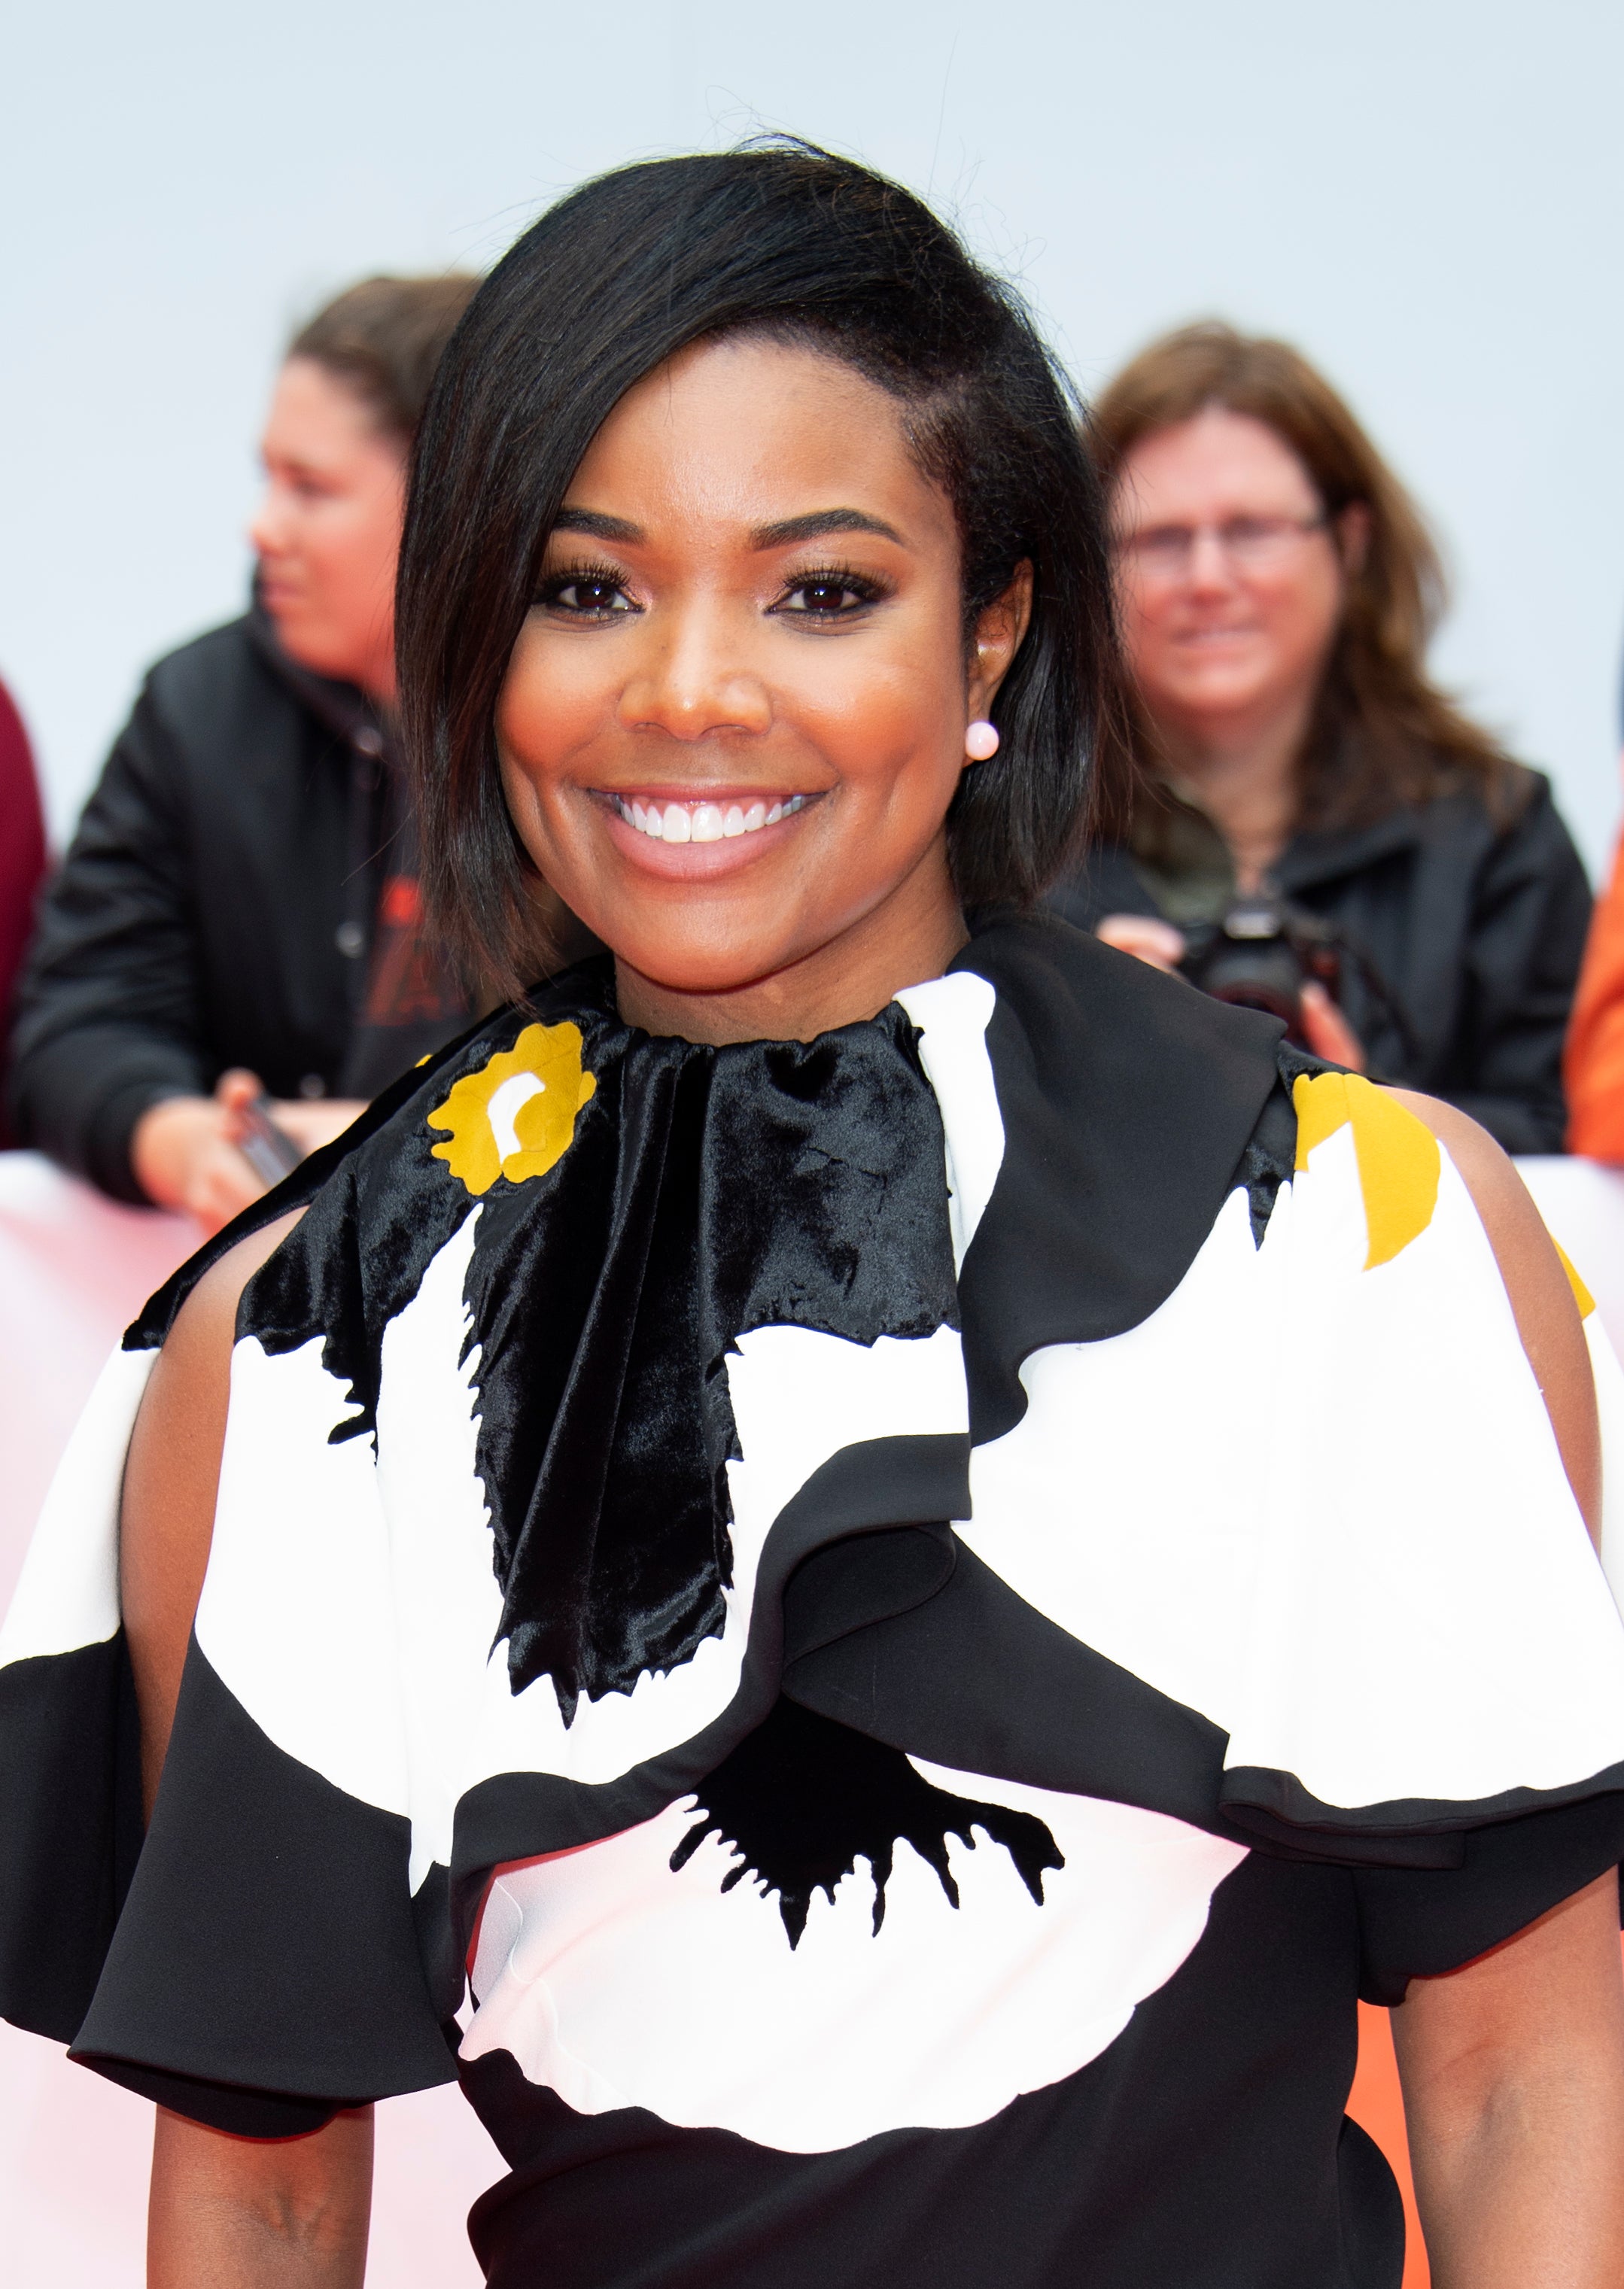 Gabrielle Union To Produce and Star In Adaptation Of Bestselling Novel 'The Perfect Find'